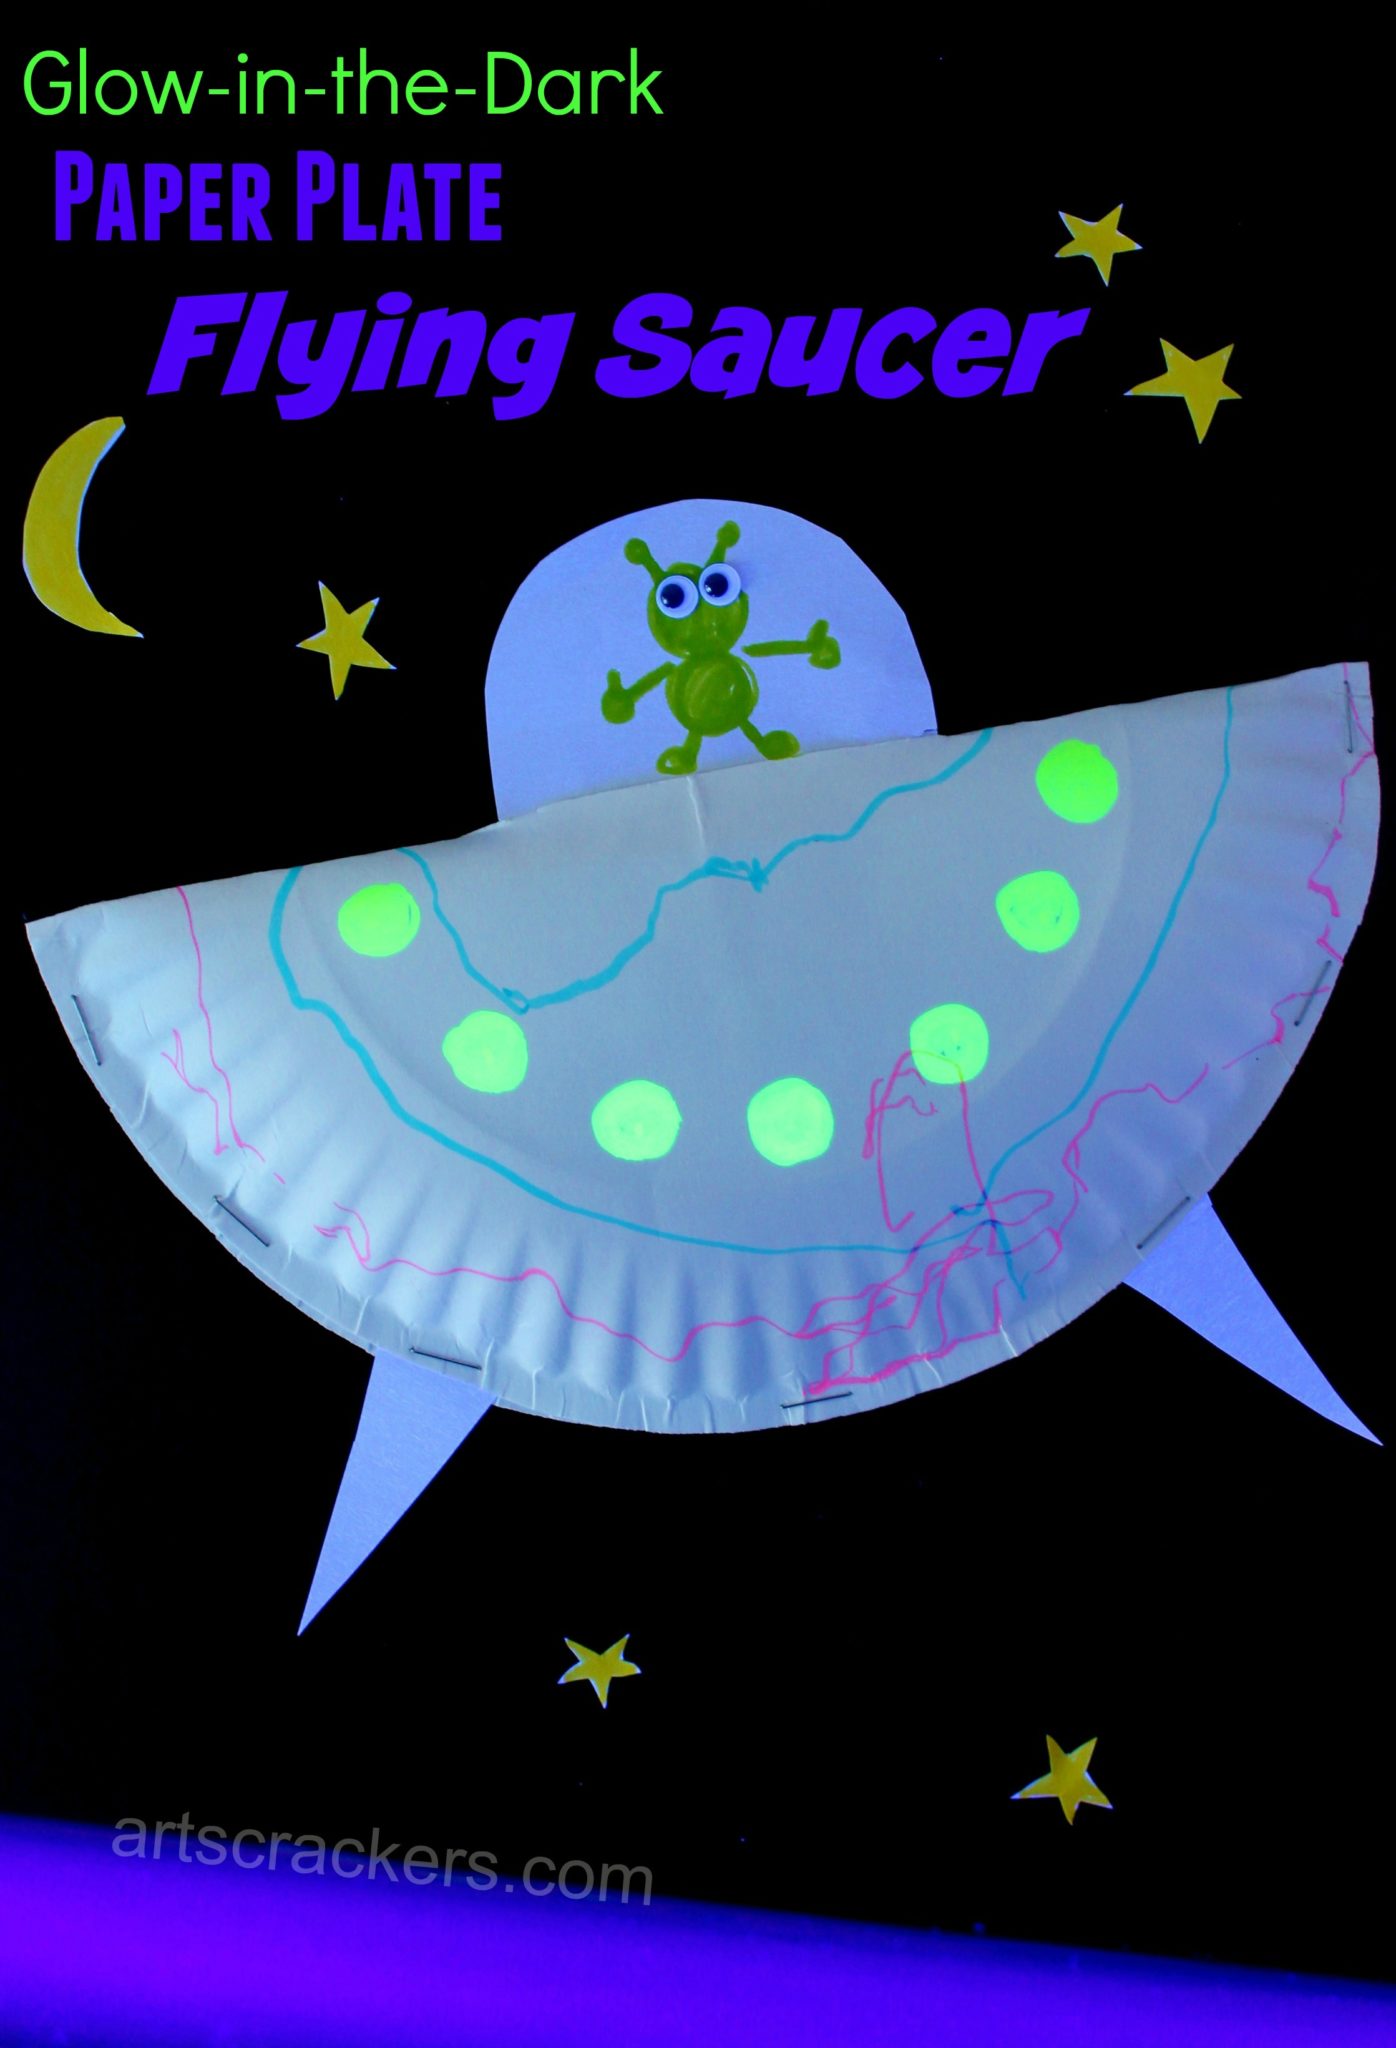 Paper Plate Flying Saucer Craft. Click the picture to view the tutorial and watch it glow!